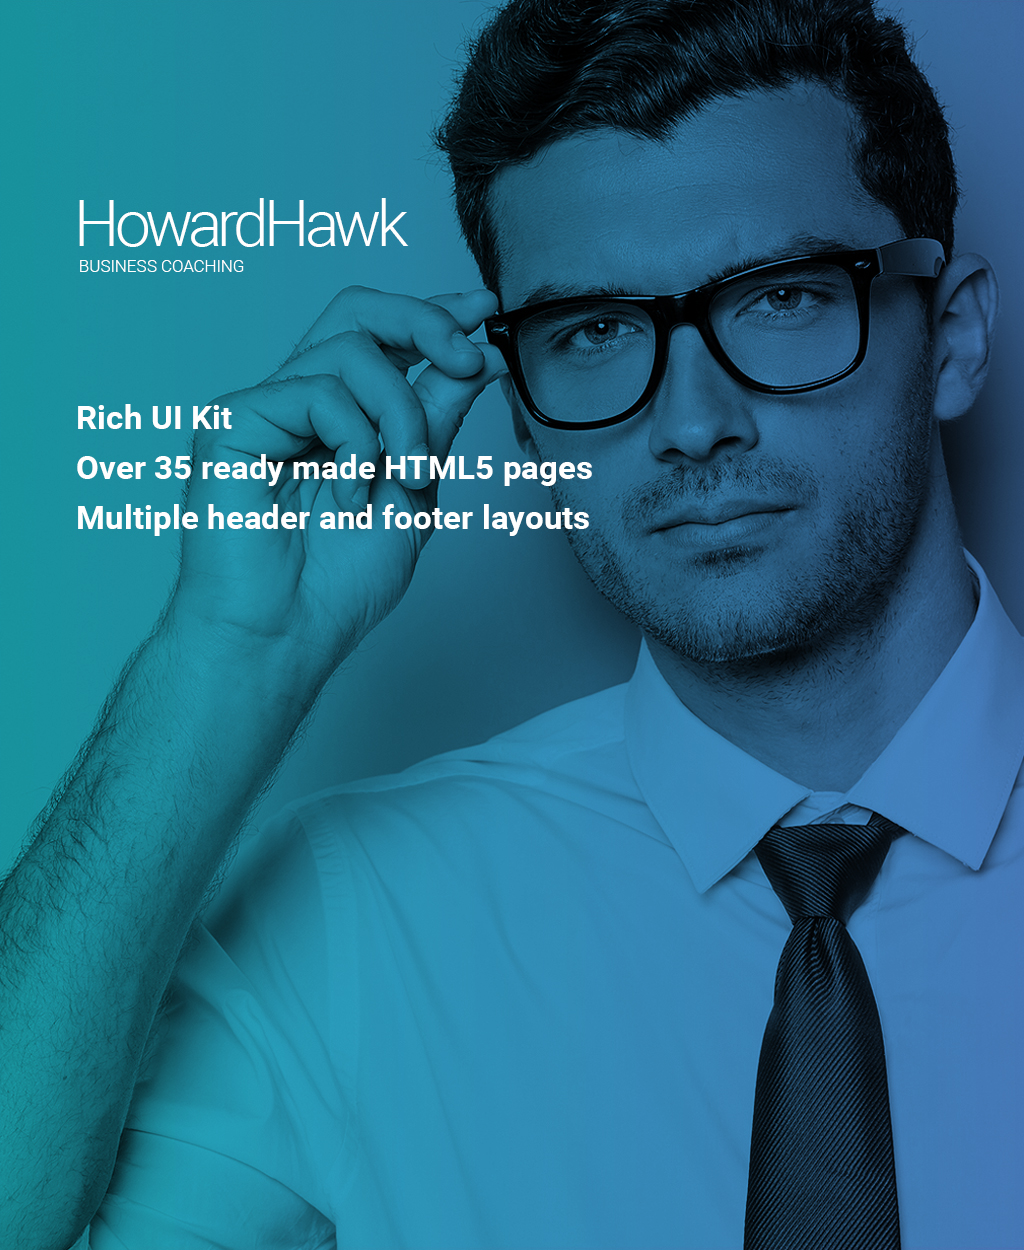 HowardHawk - Business Coaching Multipage Website Template